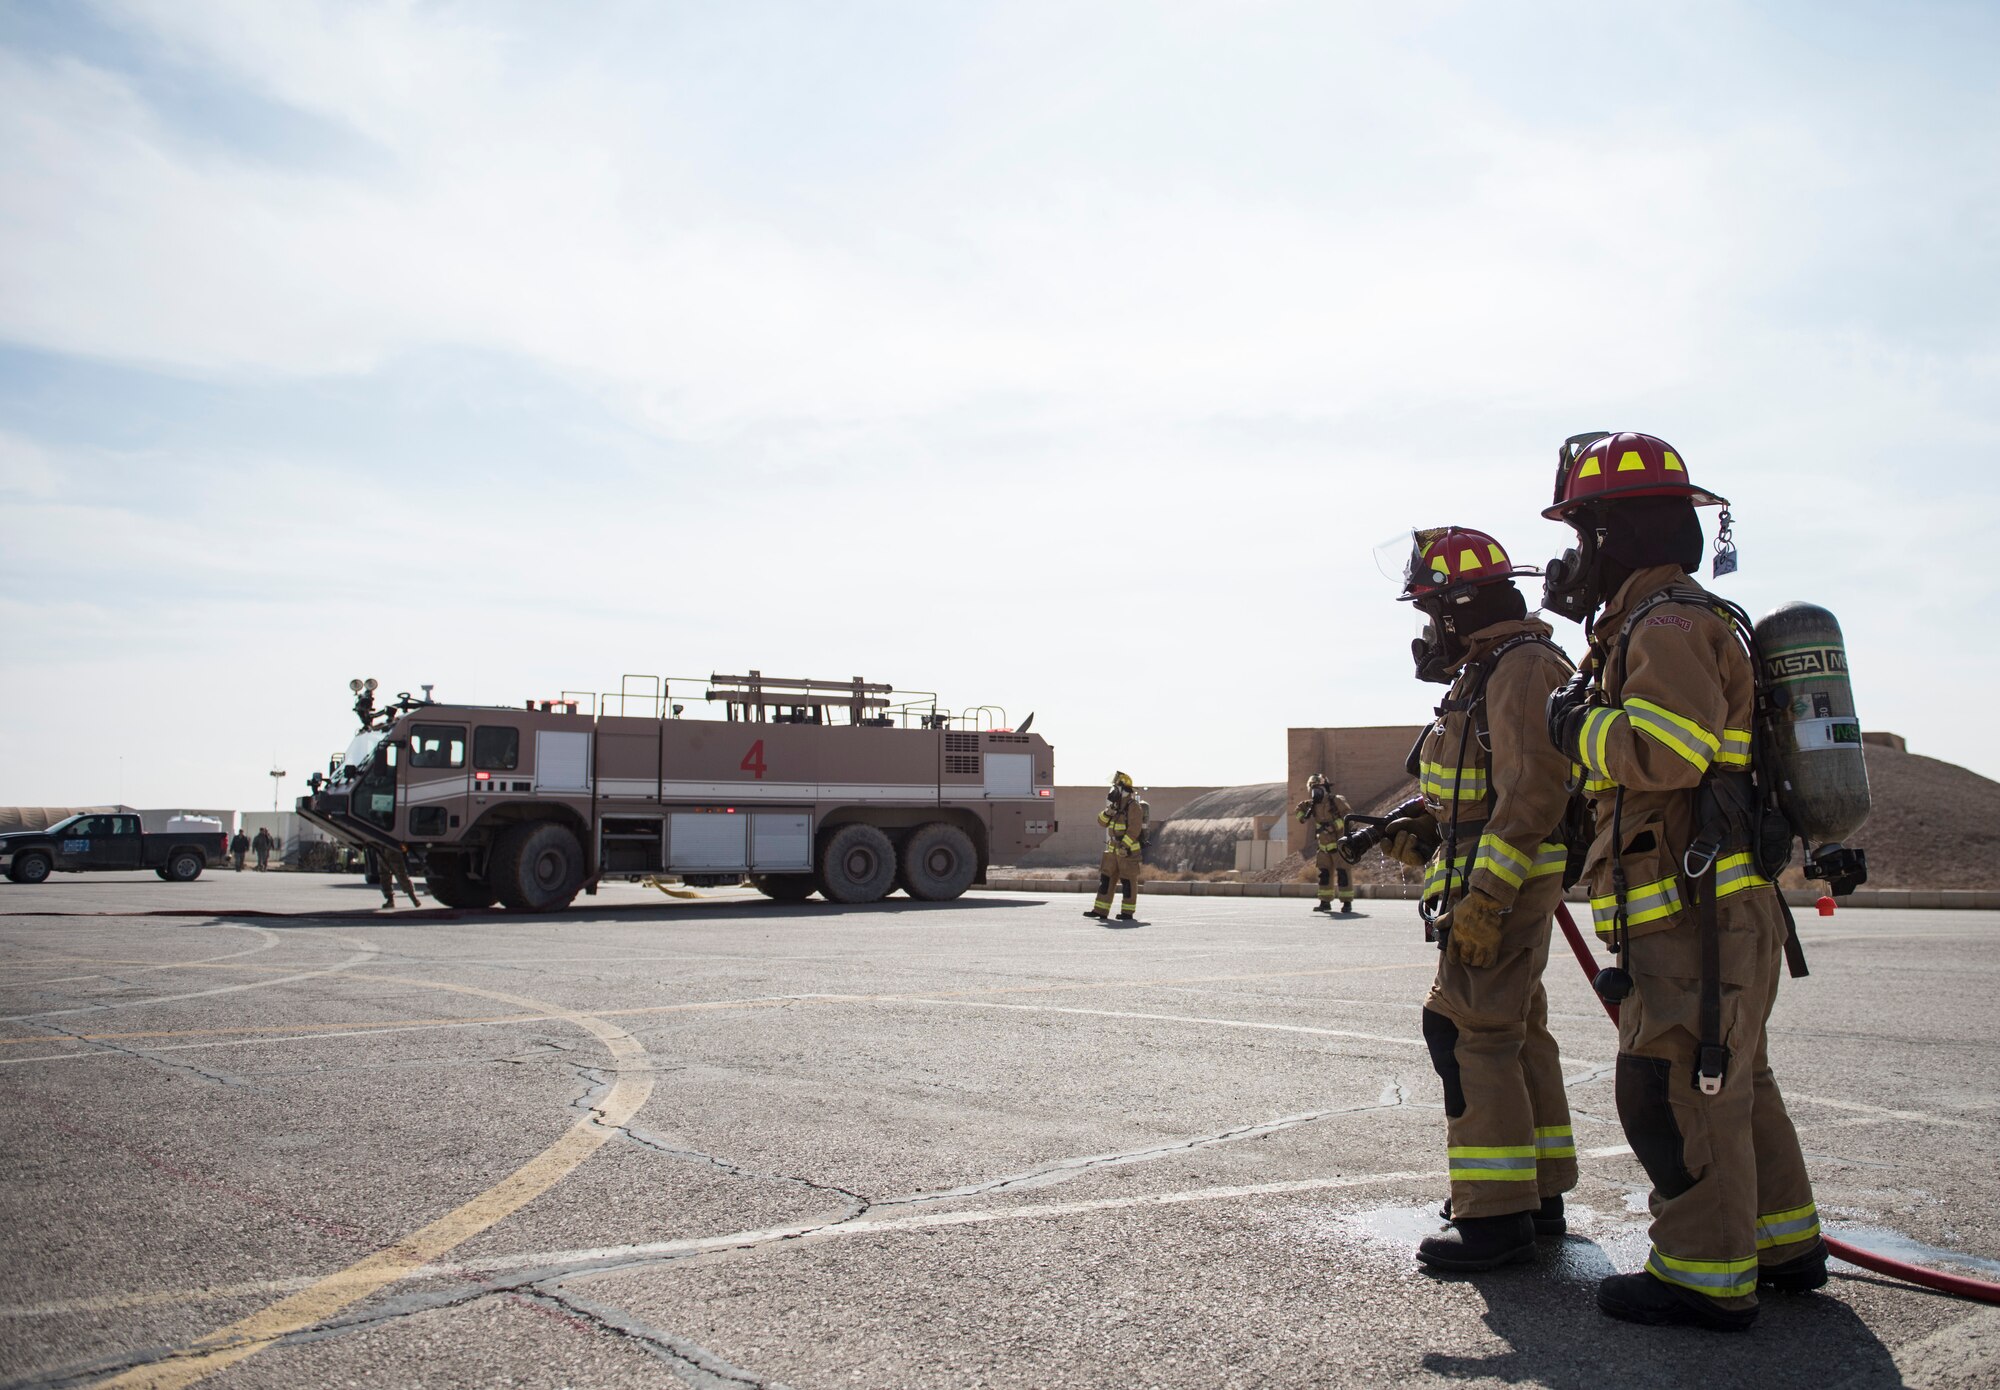 Firefighters assigned to the 332d Expeditionary Civil Engineer Squadron participate in an emergency aircraft egress training scenario February 14, 2018 in Southwest Asia. While three firefighters worked to evacuate an incapacitated pilot, their teammates established a safe perimeter and prepared for any possible escalations. (U.S. Air Force photo by Staff Sgt. Joshua Kleinholz)